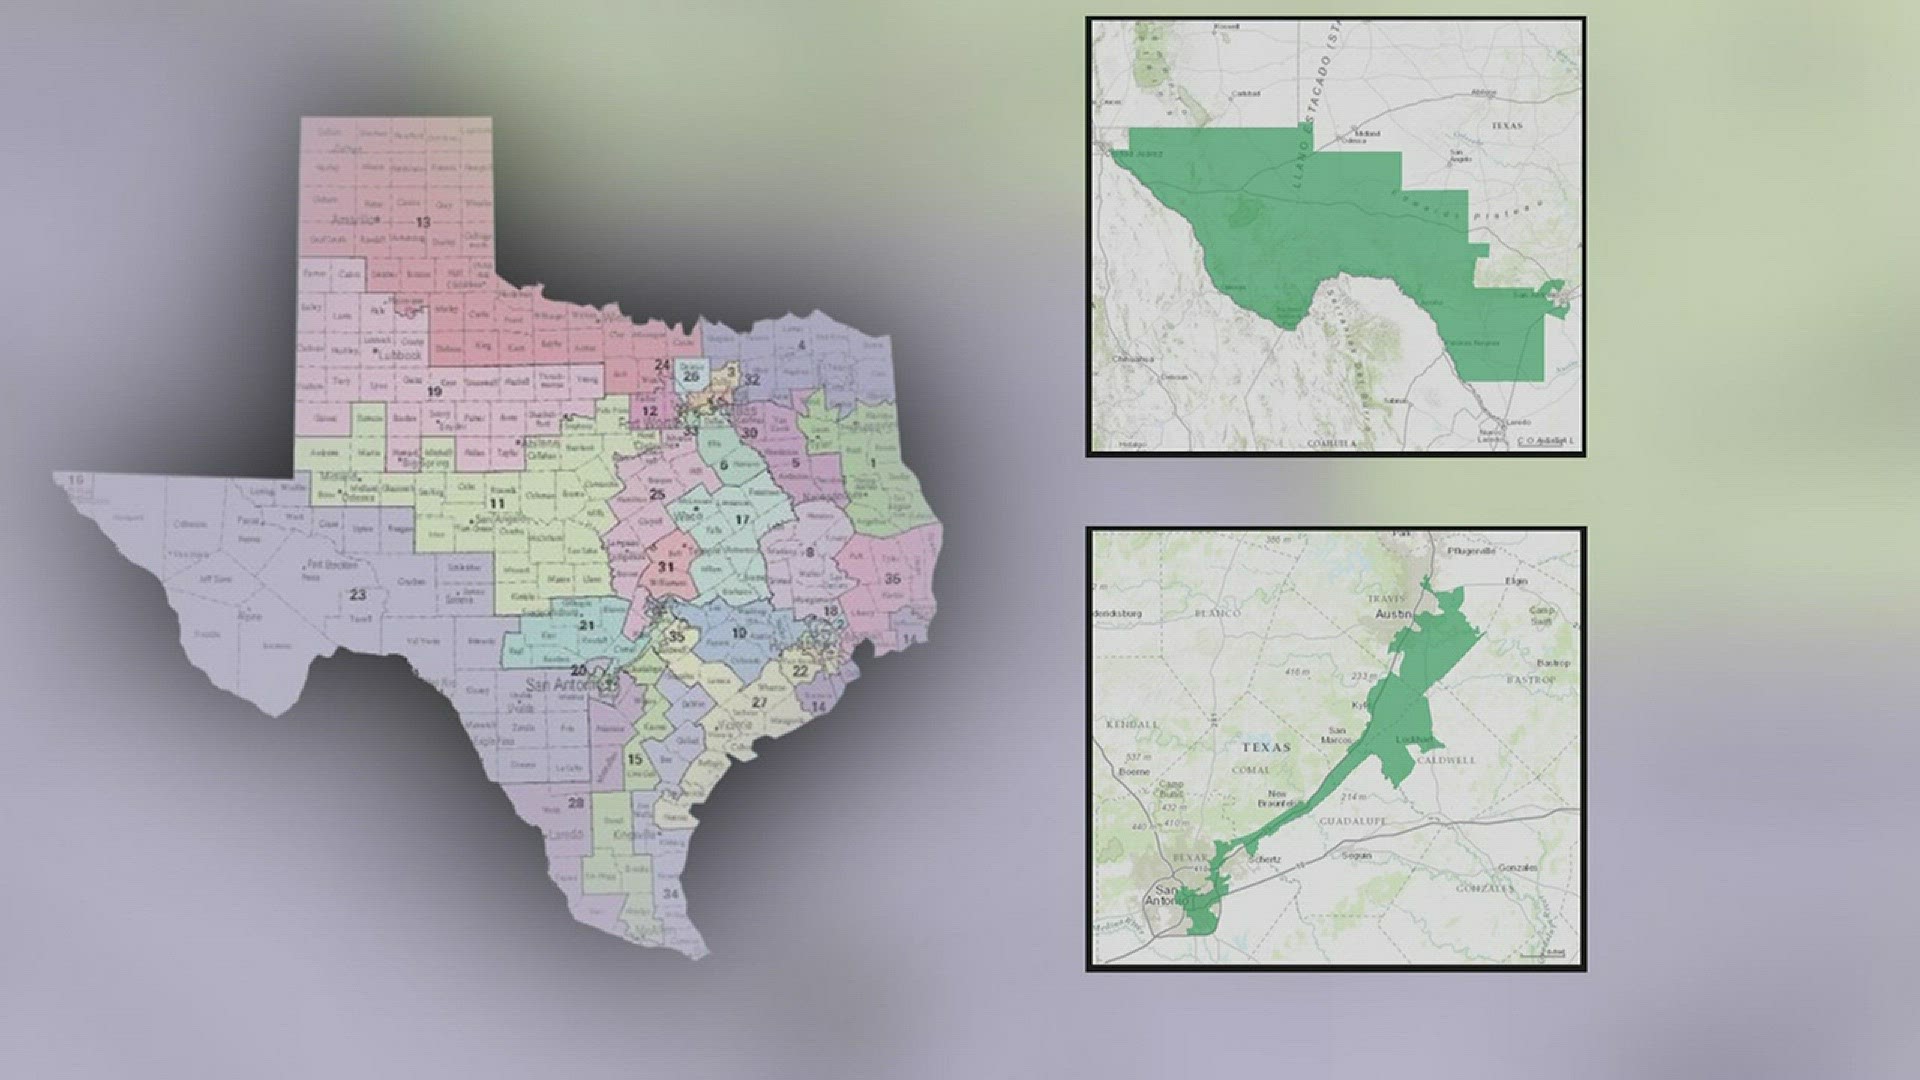 A three-judge panel will begin hearing arguments Monday morning regarding the state's congressional maps, which were drawn after the 2010 census.